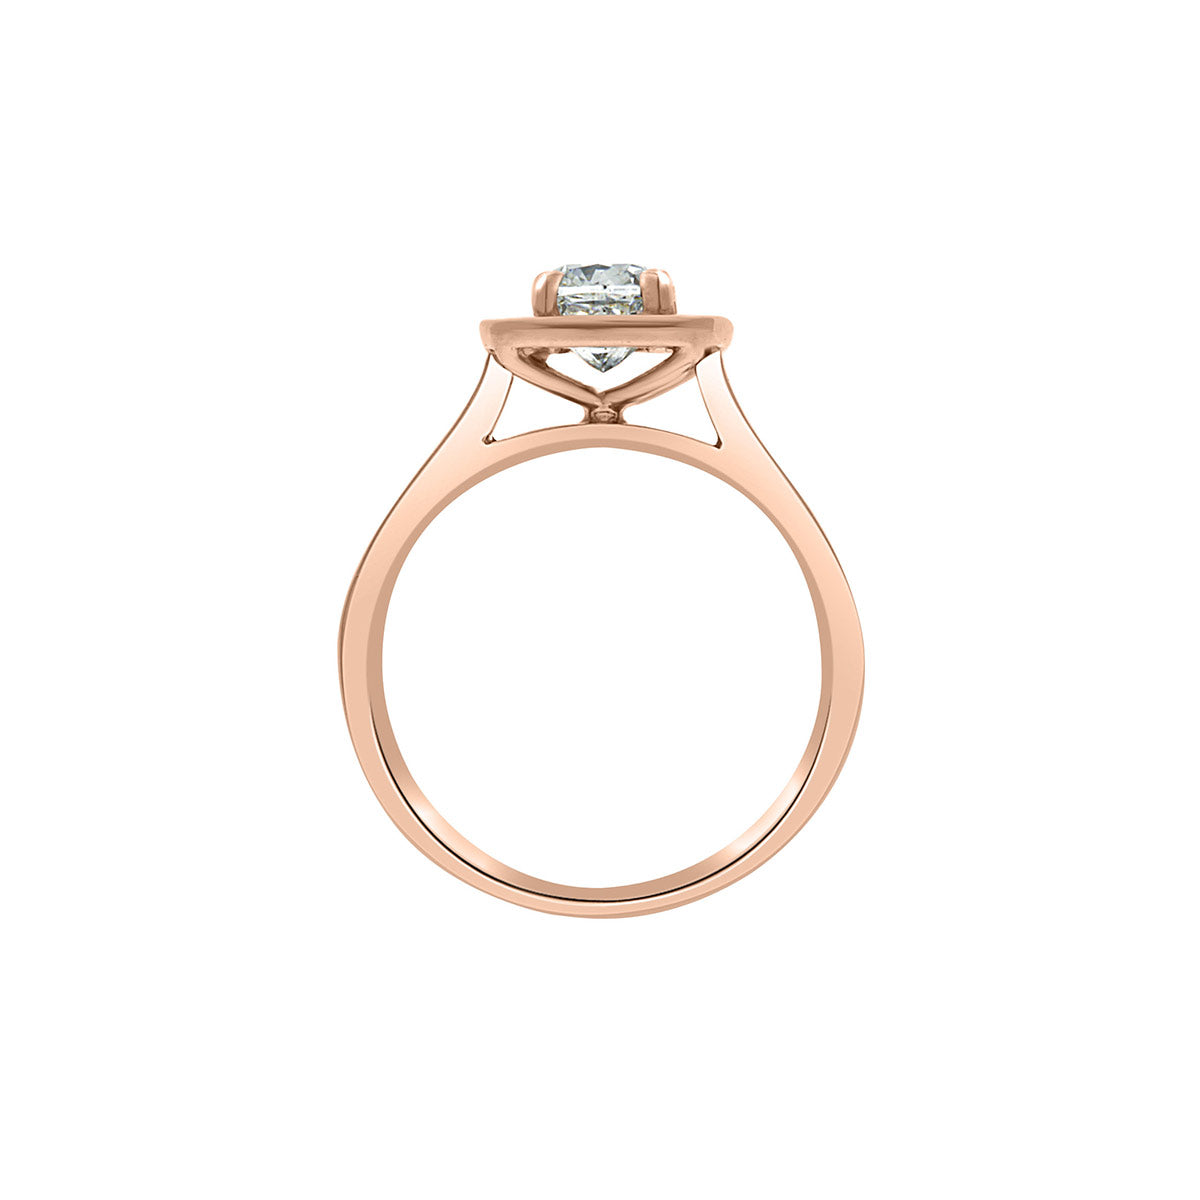 Cushion Cut Diamond Ring in rose gold in an upright position